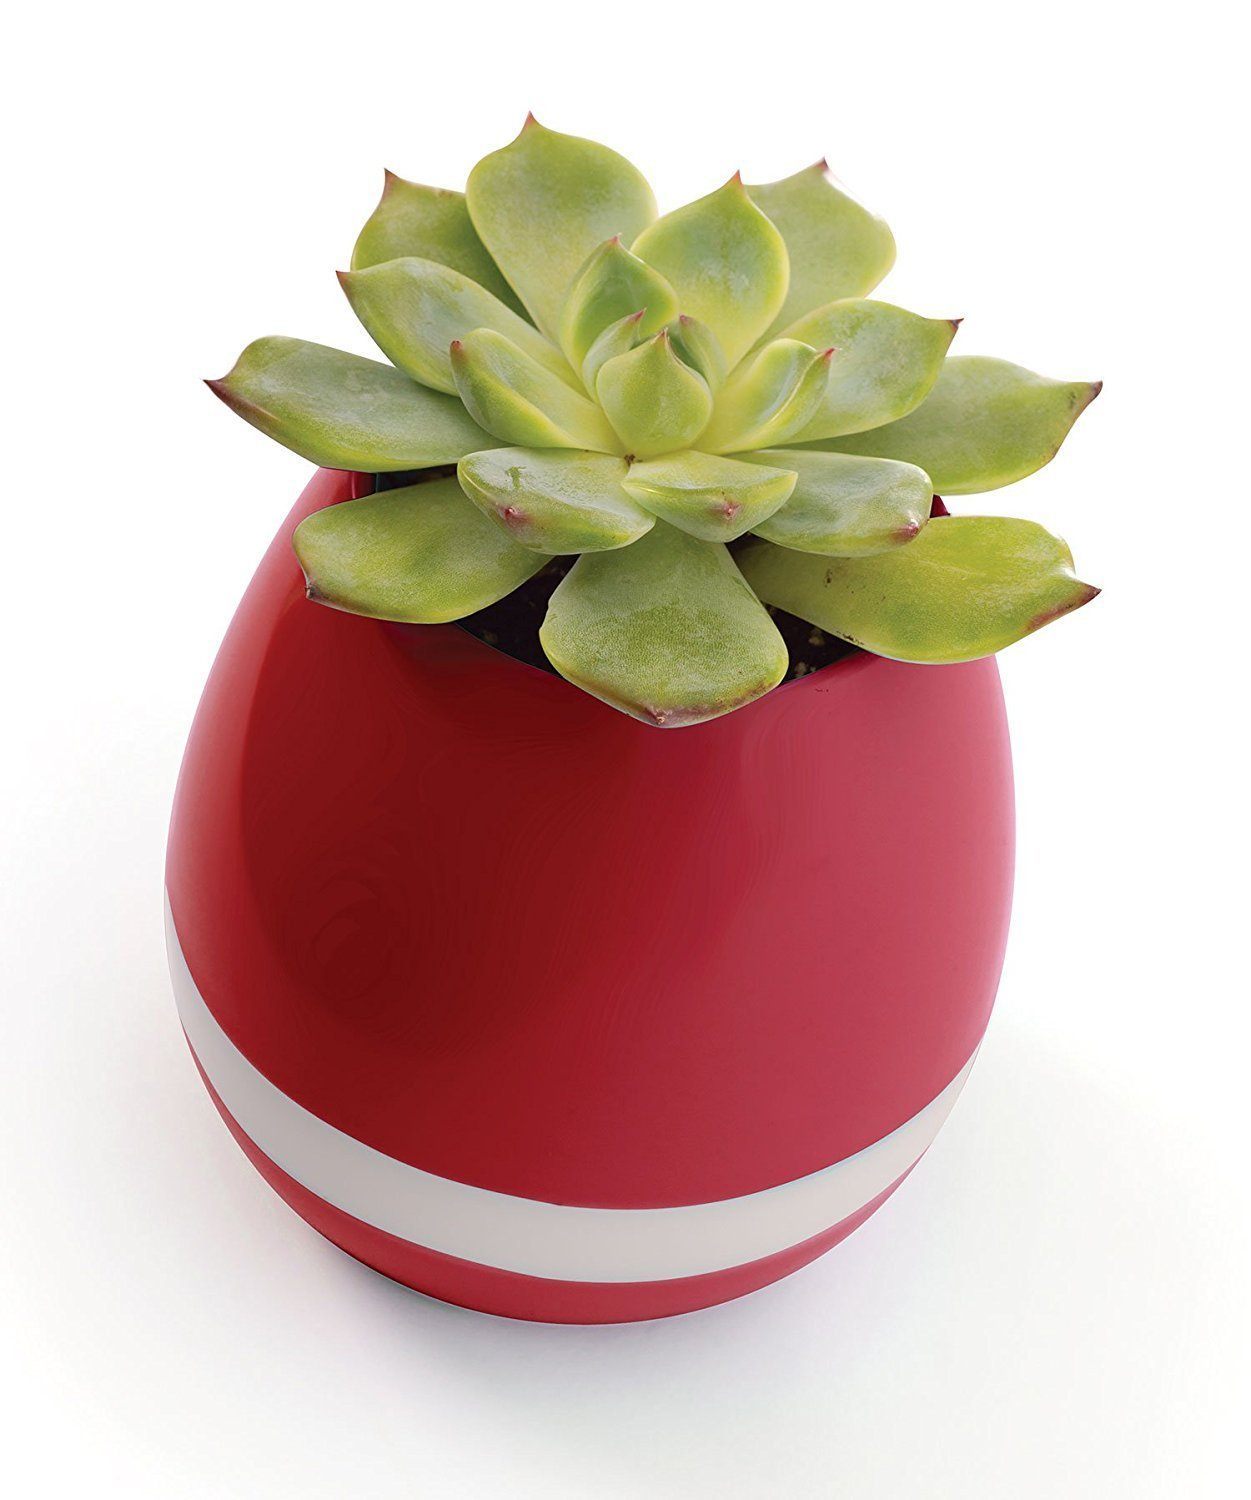 Bluetooth Color Changing Musical Flower Pot